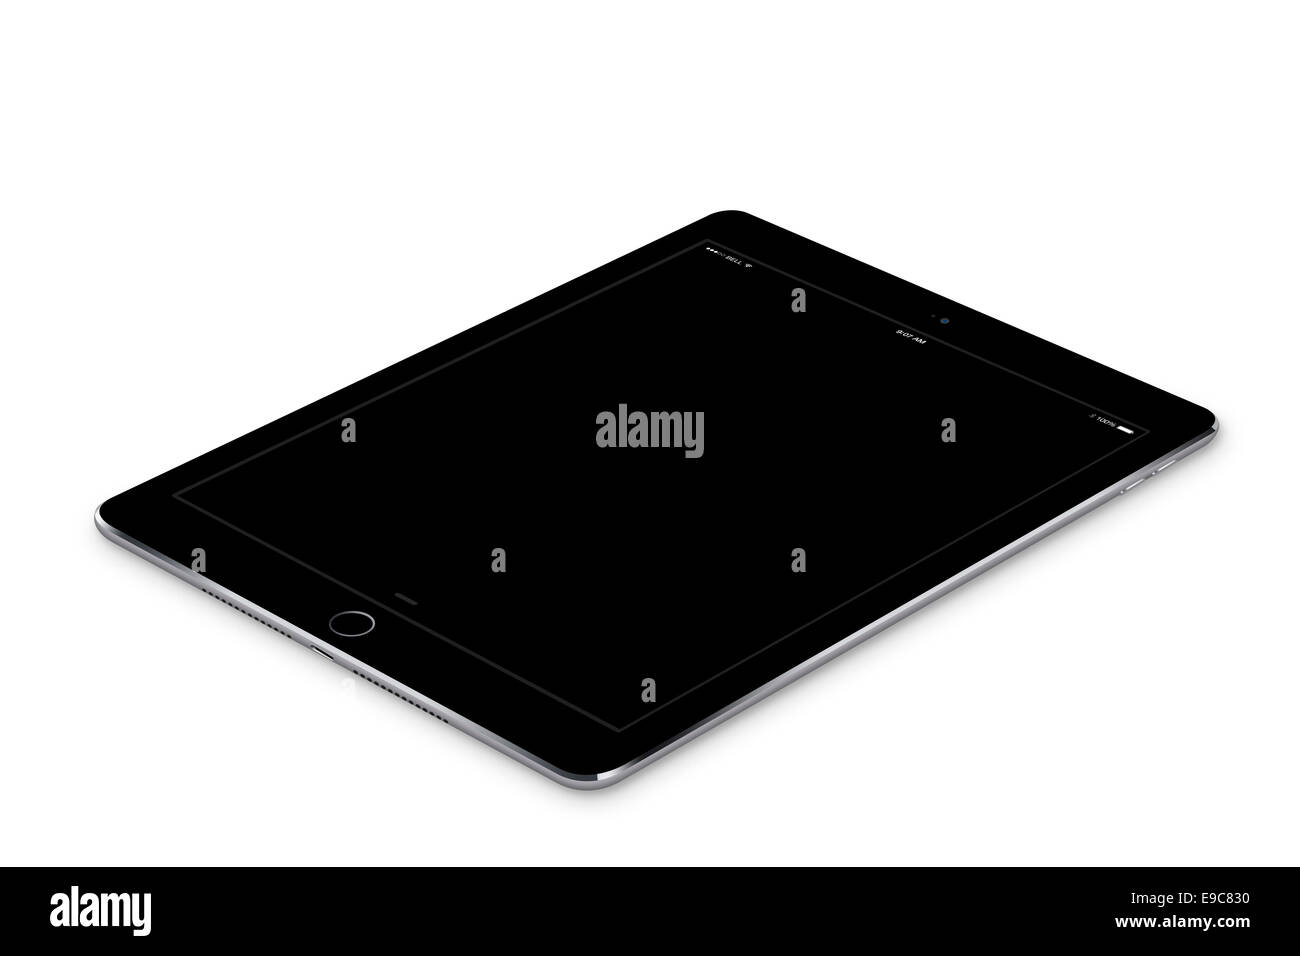 Tablet ipad air 2 space gray with black blank screen, digitally generated artwork. Stock Photo